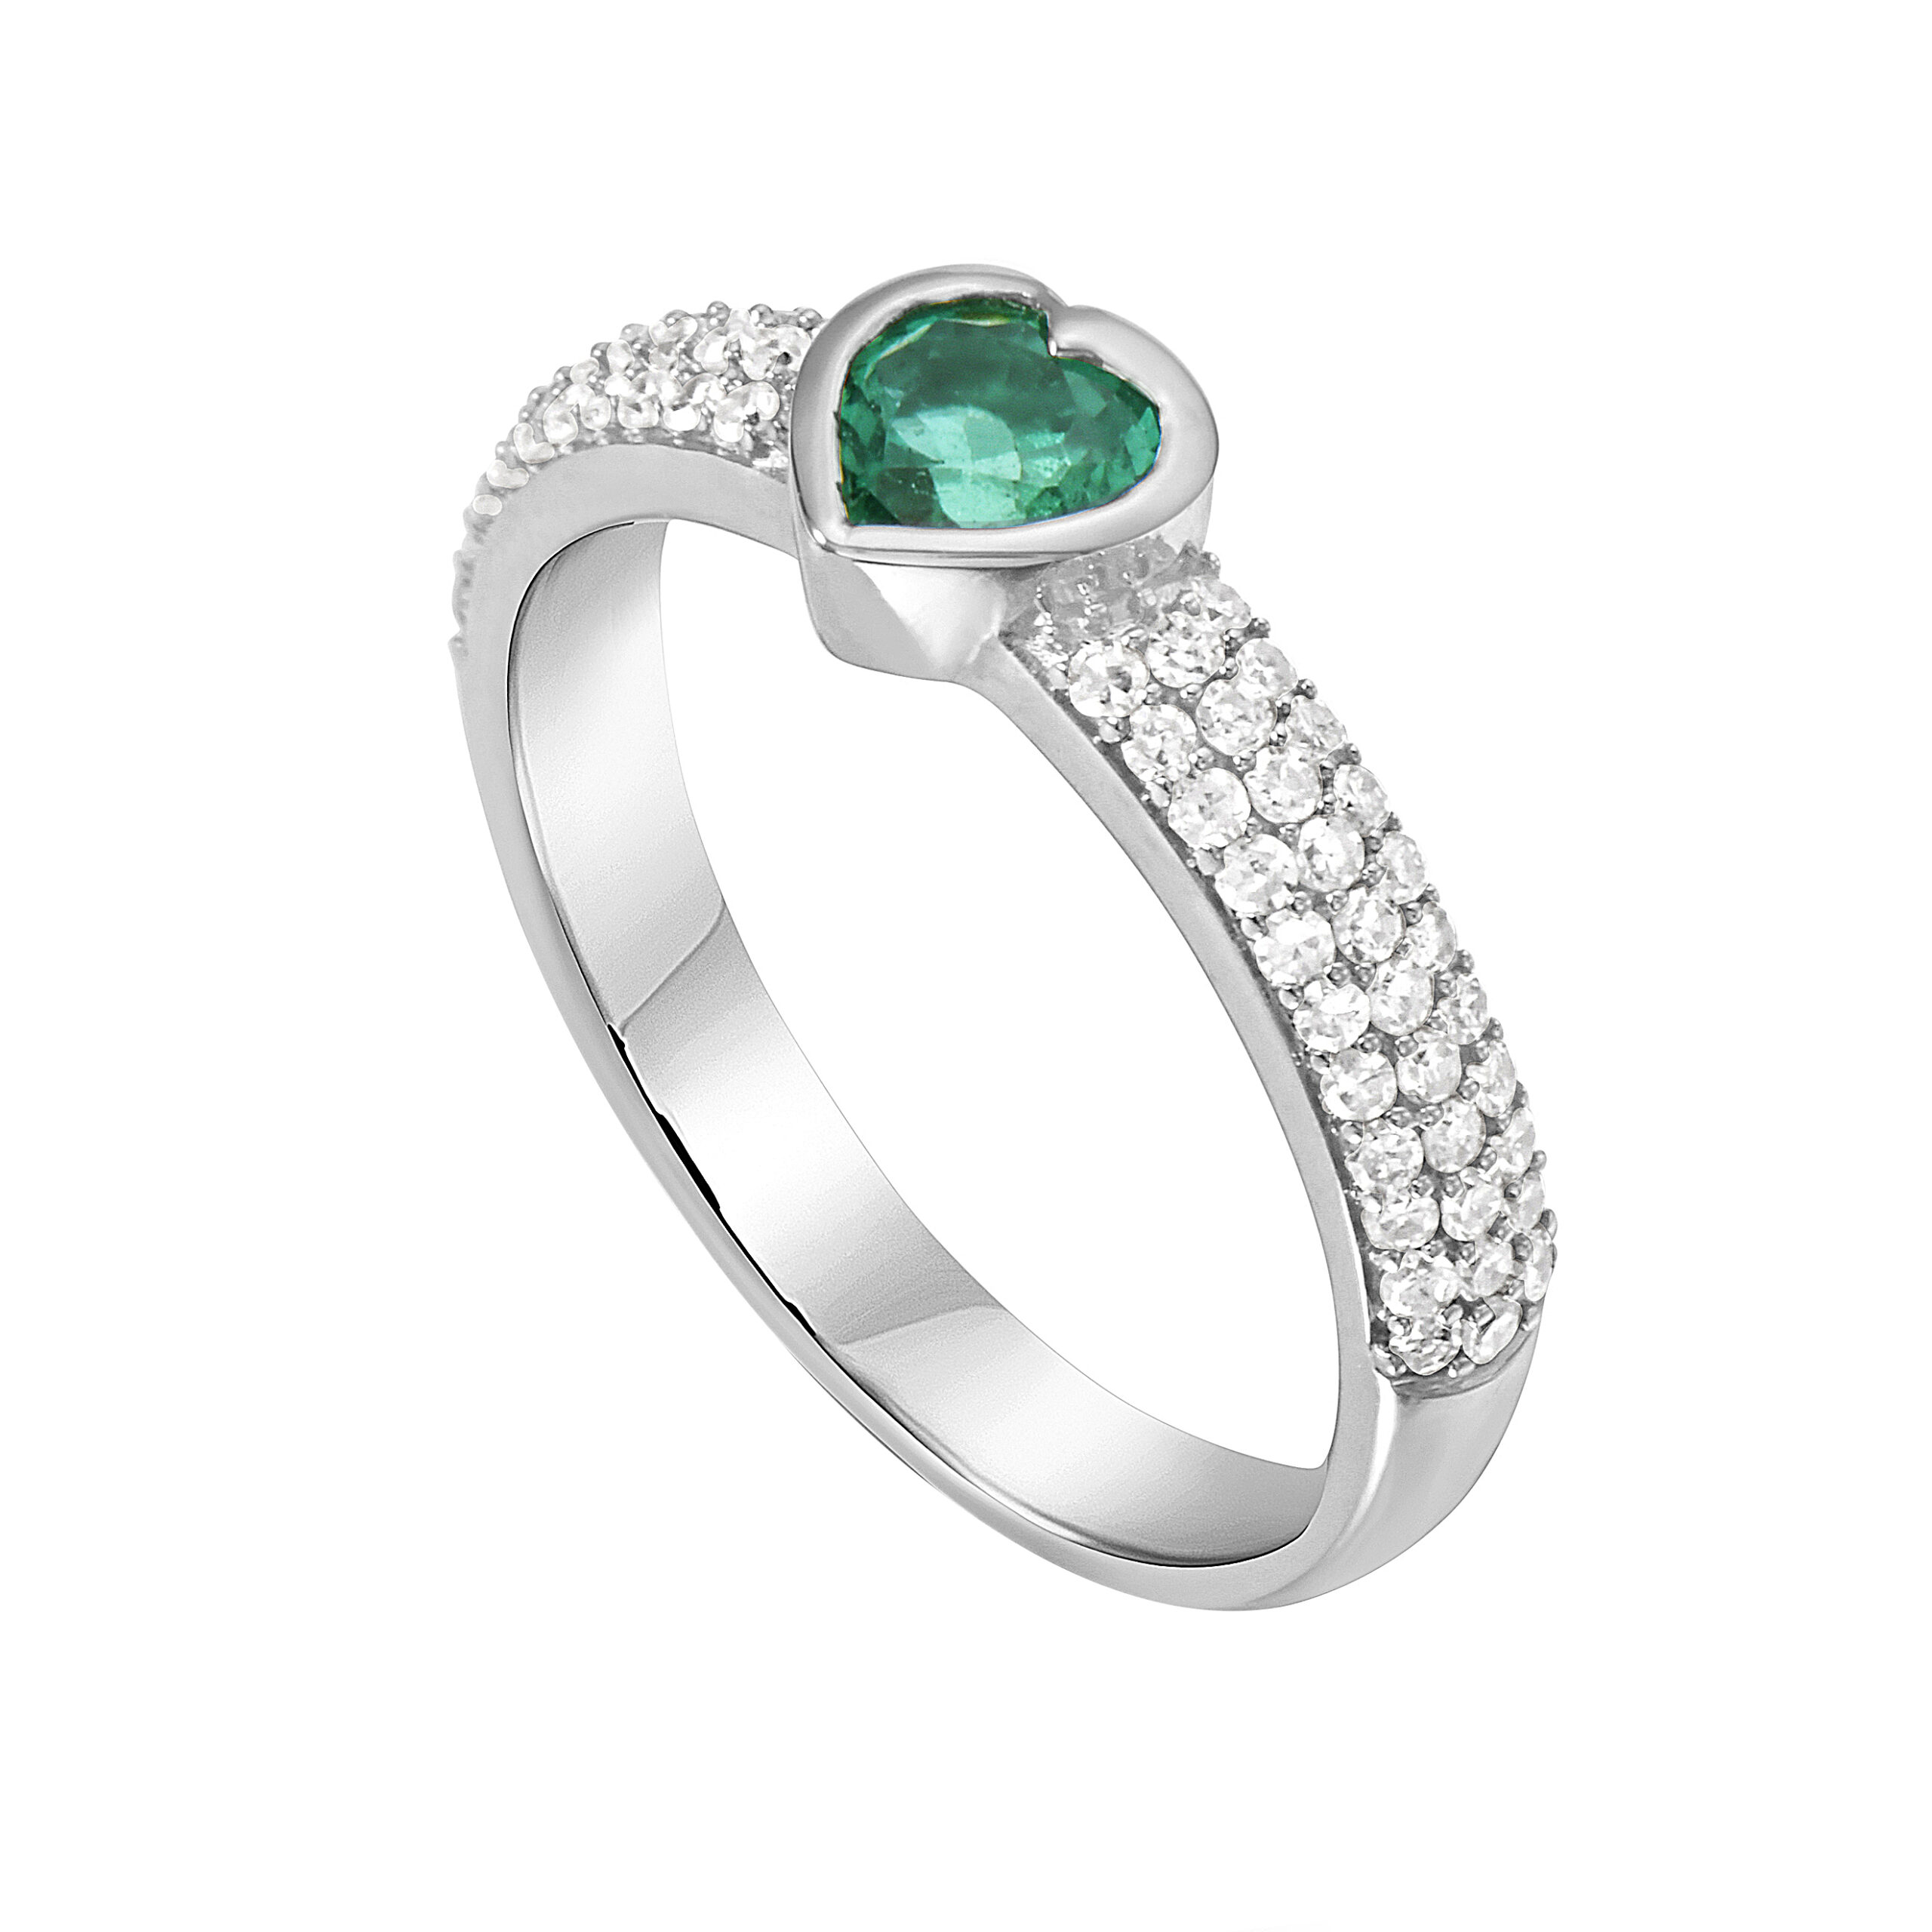 Emerald Heart Ring In 14K White Gold With Pavé Diamonds - Lionheart